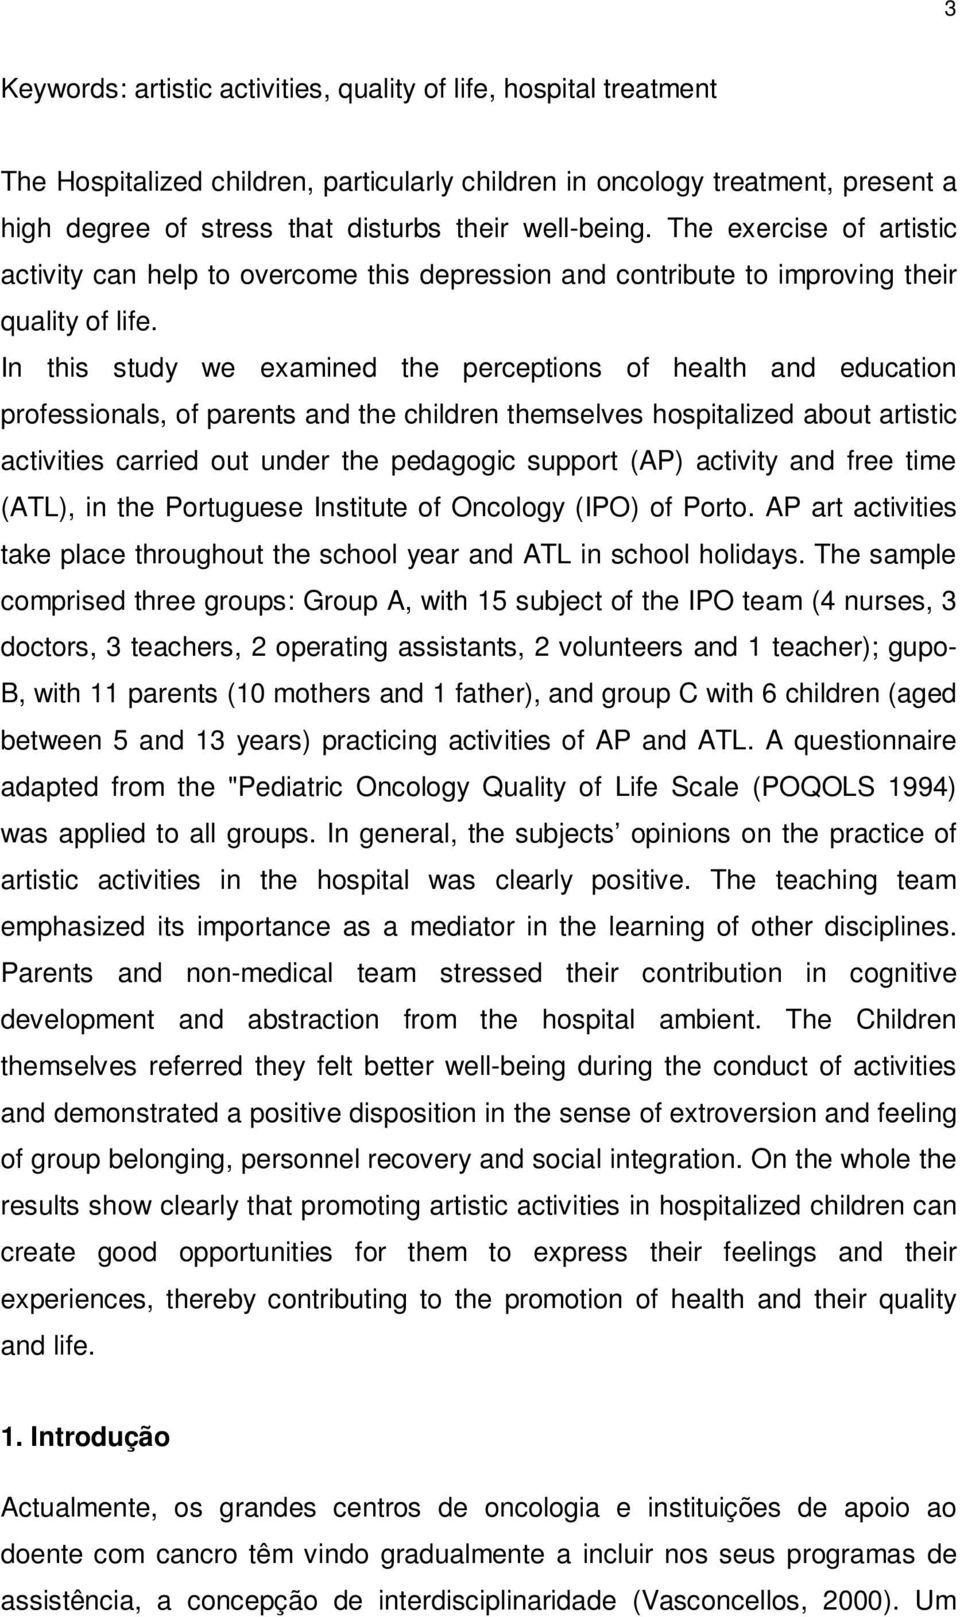 In this study we examined the perceptions of health and education professionals, of parents and the children themselves hospitalized about artistic activities carried out under the pedagogic support